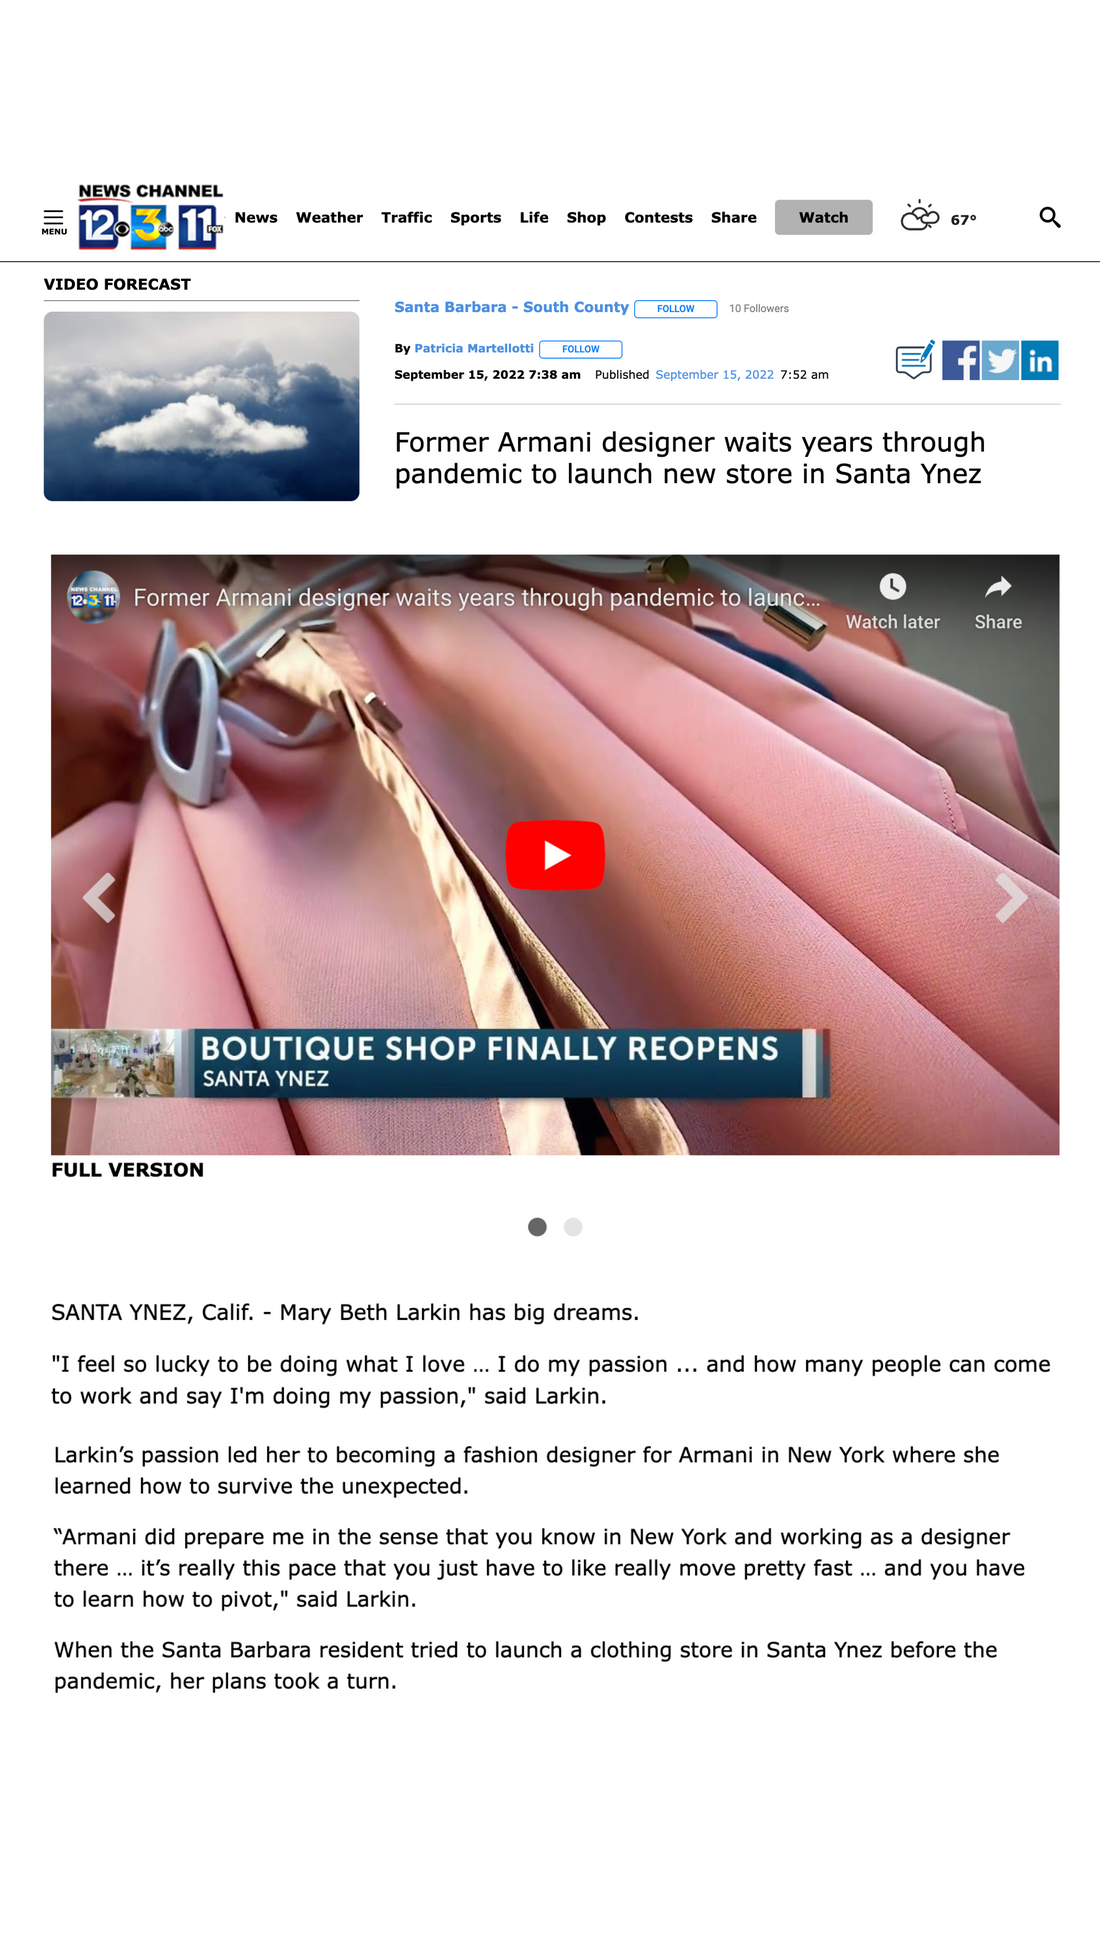  KEYT news channel story on Mary Beth Larkin former armani designer who waited through the pandemic to launch a flagship store in Santa Ynez, California